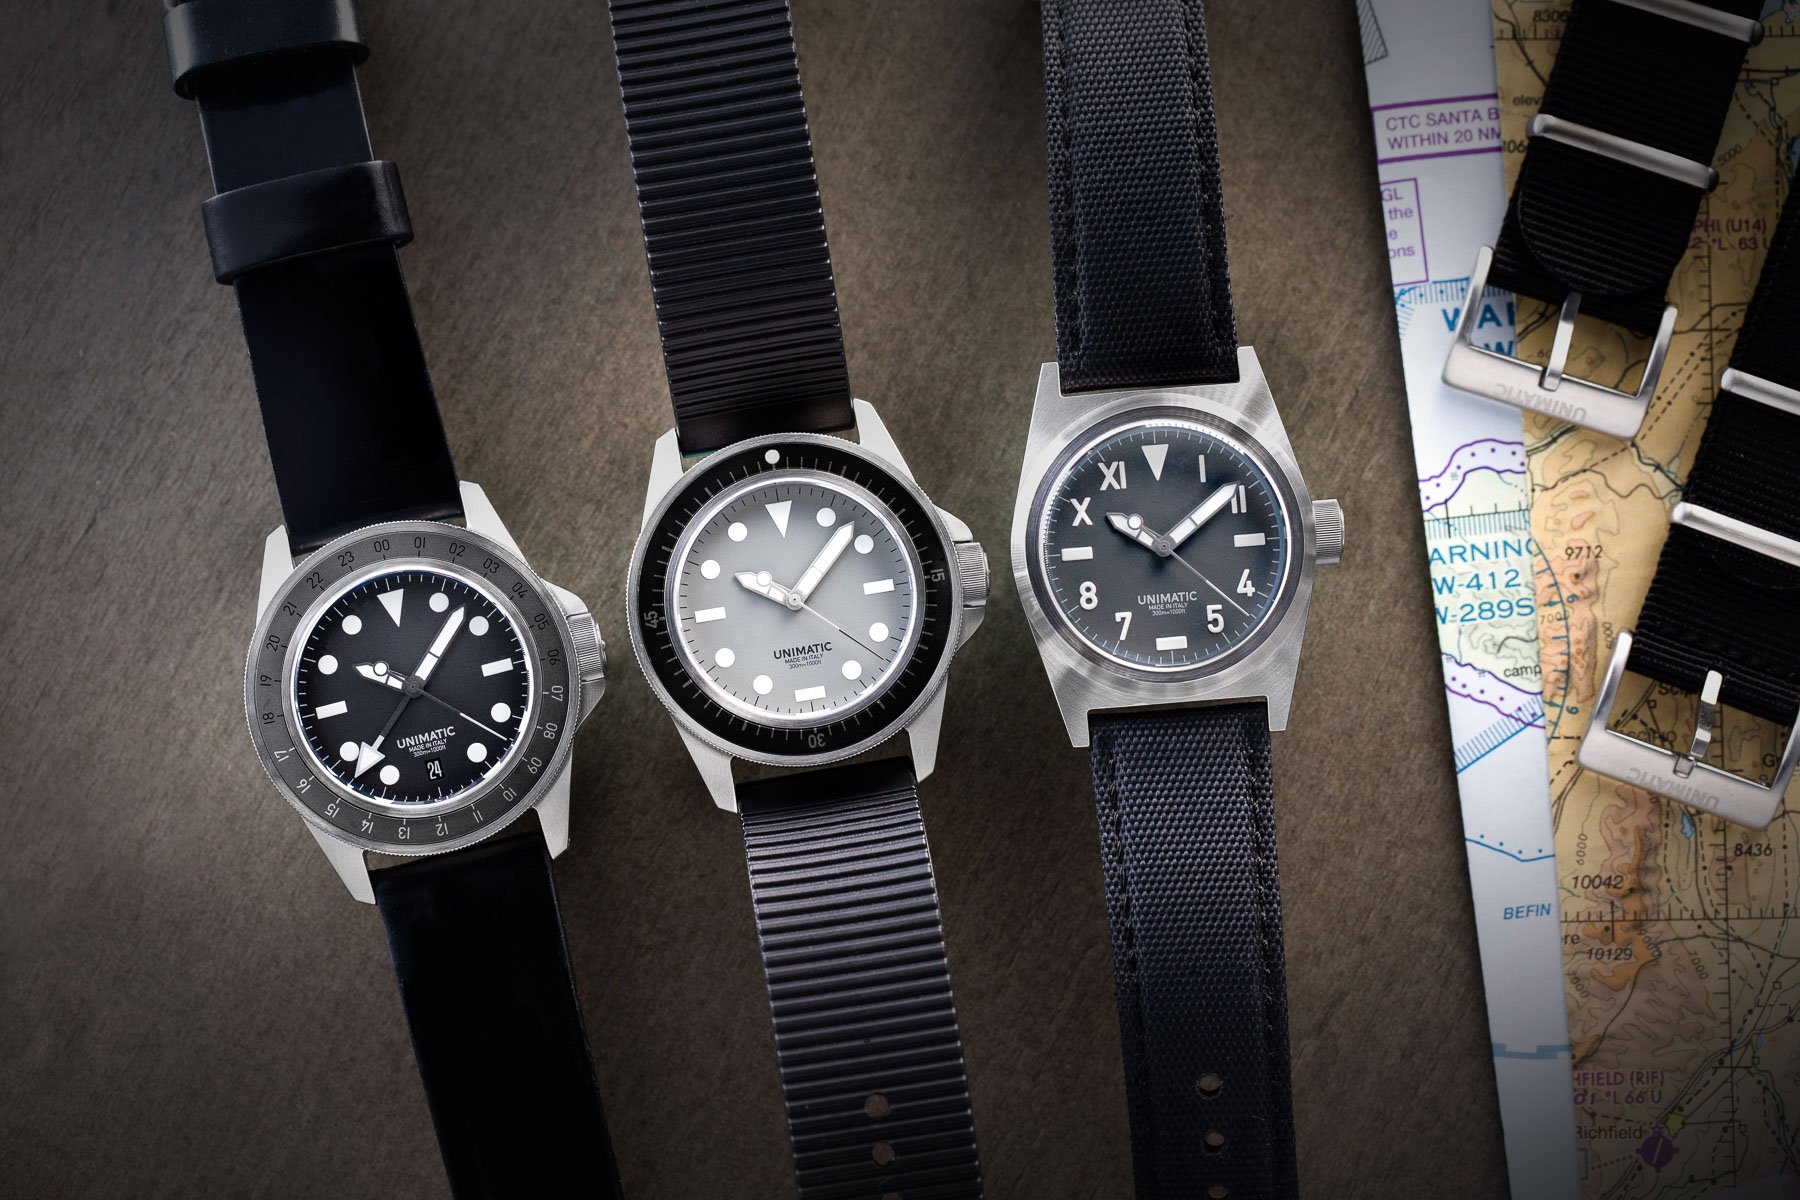 Hodinkee And Unimatic Team Up To Release The Unimatic H Series